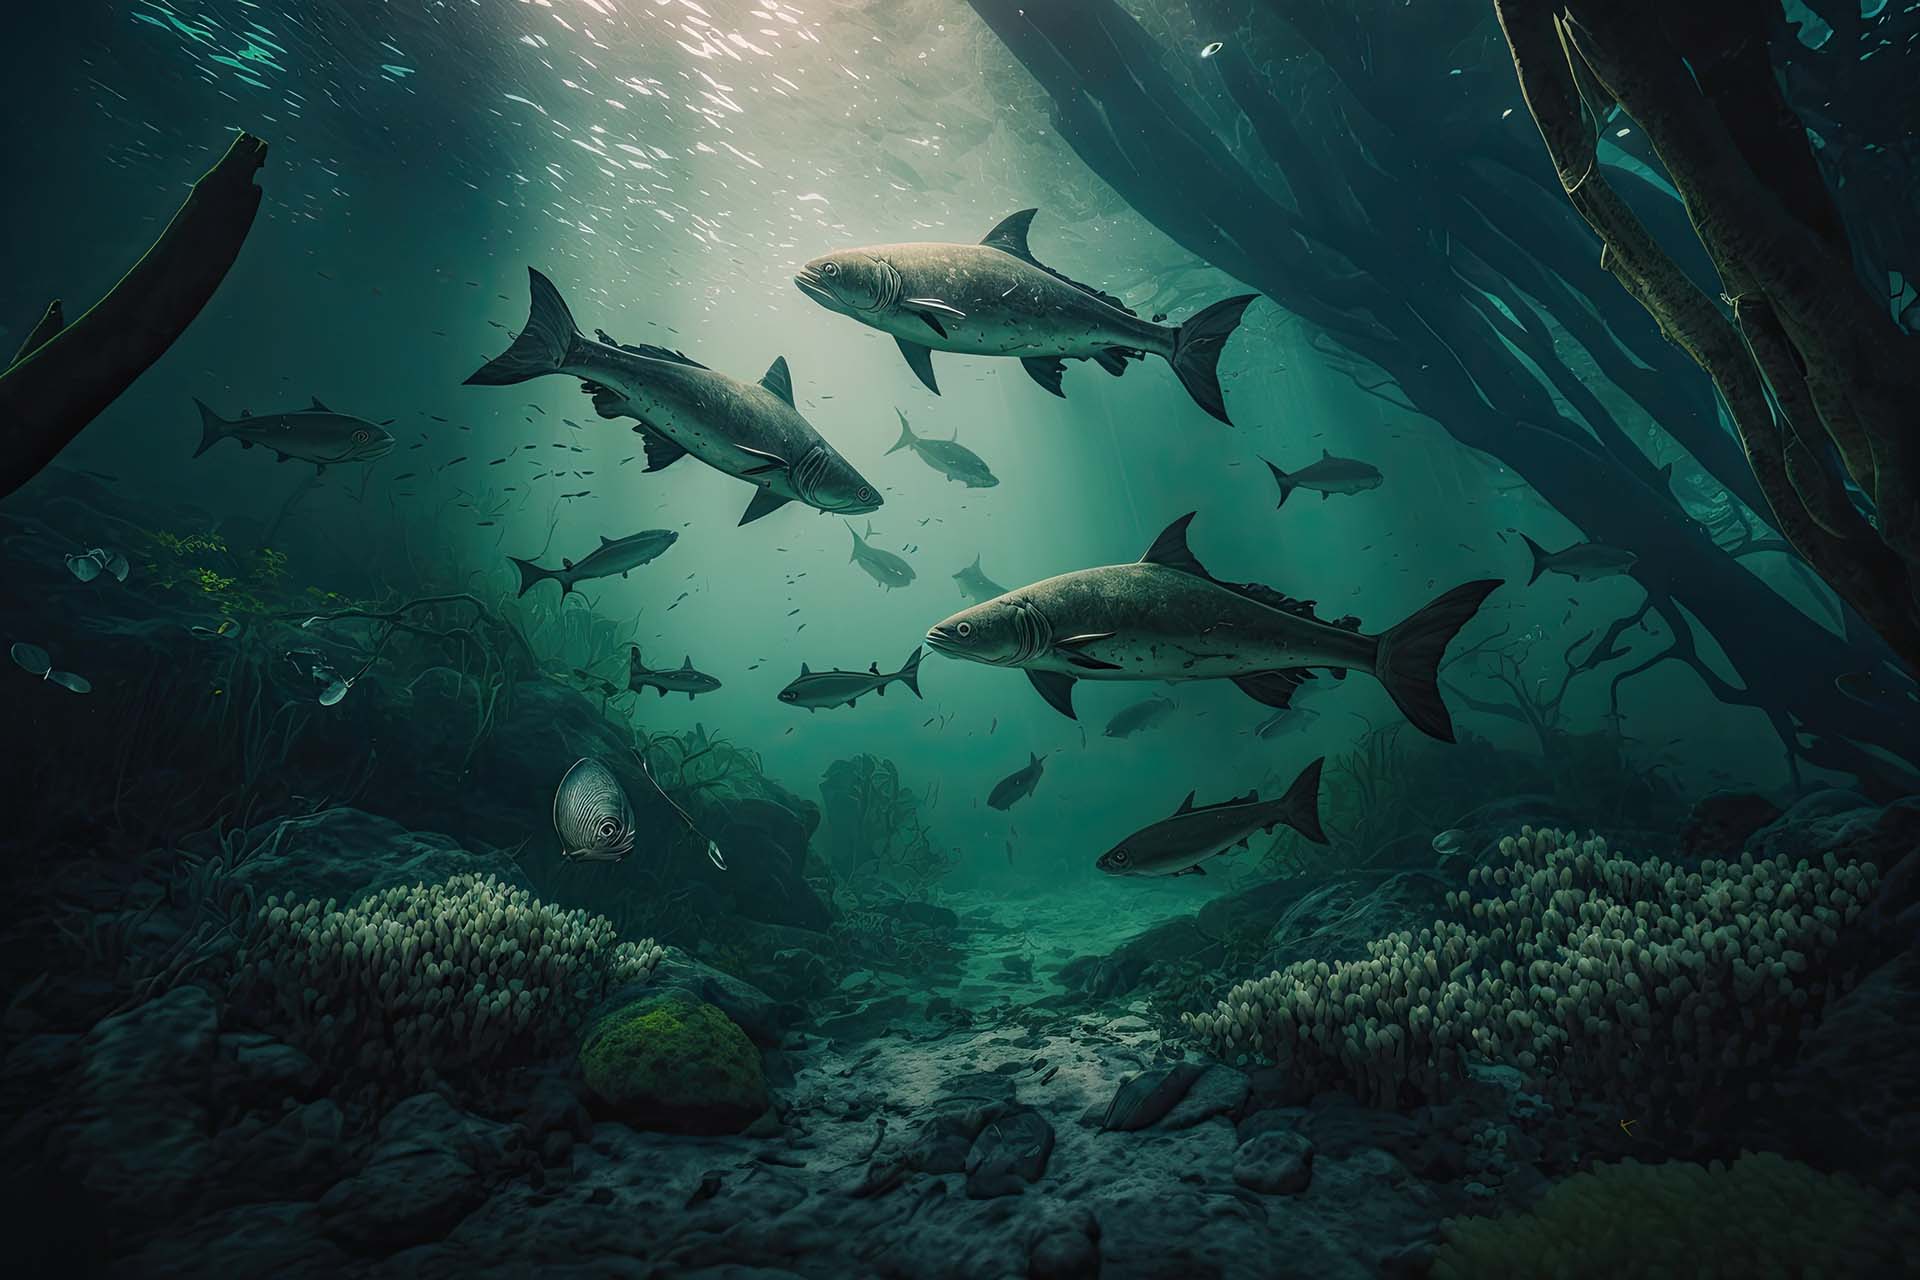 In this stunning cinematic shot, we are transported to an underwater world filled with life and wonder. Multiple fishes of all shapes and sizes glide gracefully through the crystal-clear waters, their scales shimmering in the dappled sunlight filtering through the lush foliage above. The rich greenery of the surrounding nature creates a sense of tranquility and abundance, as if we are witnessing a vibrant ecosystem in perfect harmony. The camera angle is carefully chosen, placing us at the level of the fish and allowing us to feel fully immersed in this captivating aquatic environment. It's a breathtaking scene that captures the raw beauty of nature and invites us to dive deeper into its mysteries.